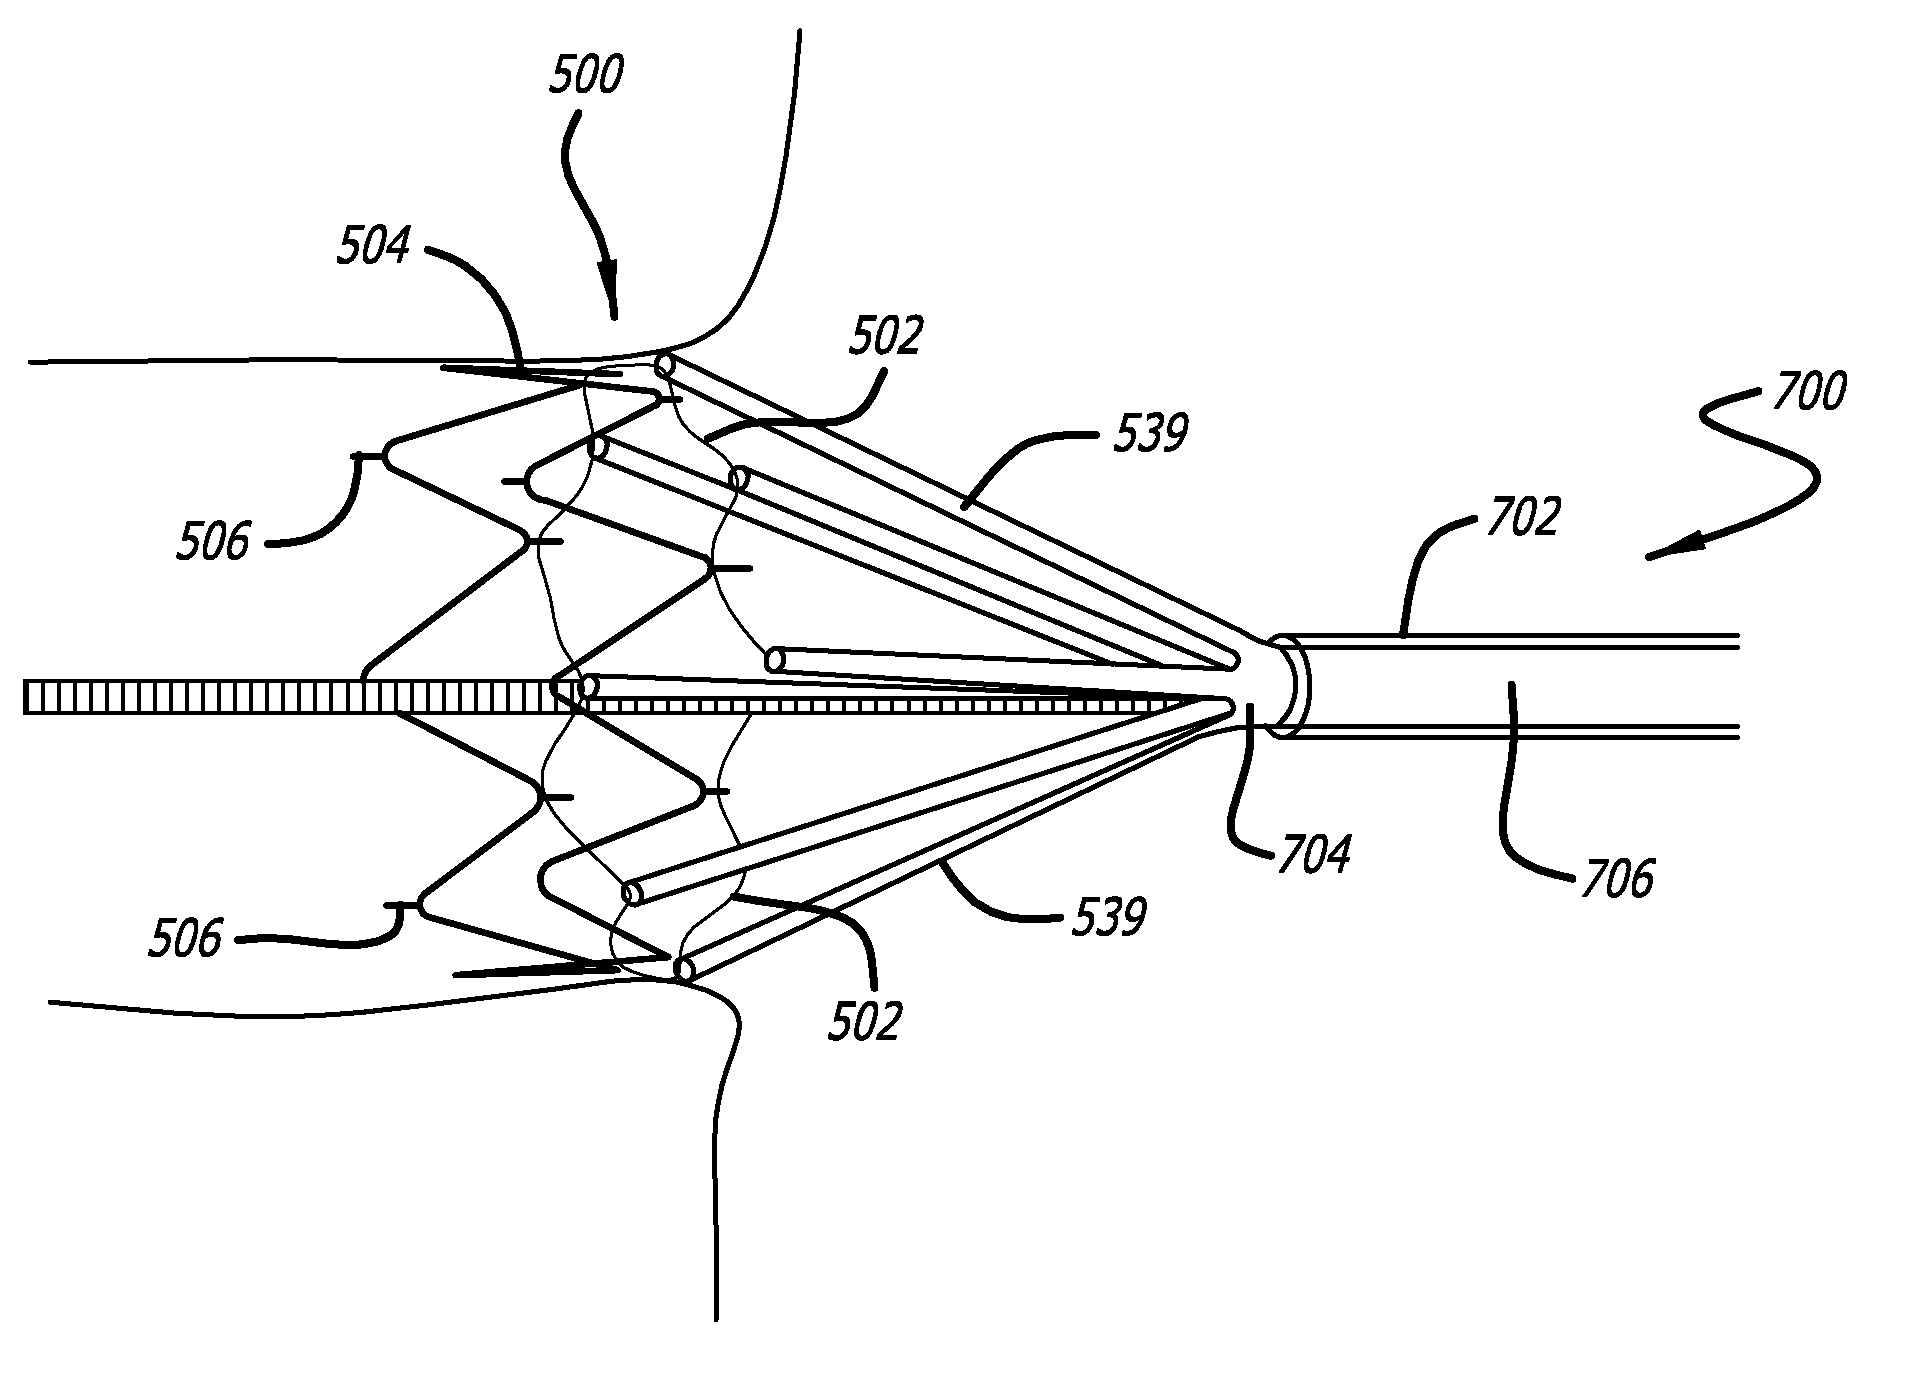 Electrical Conduction Block Implant Device